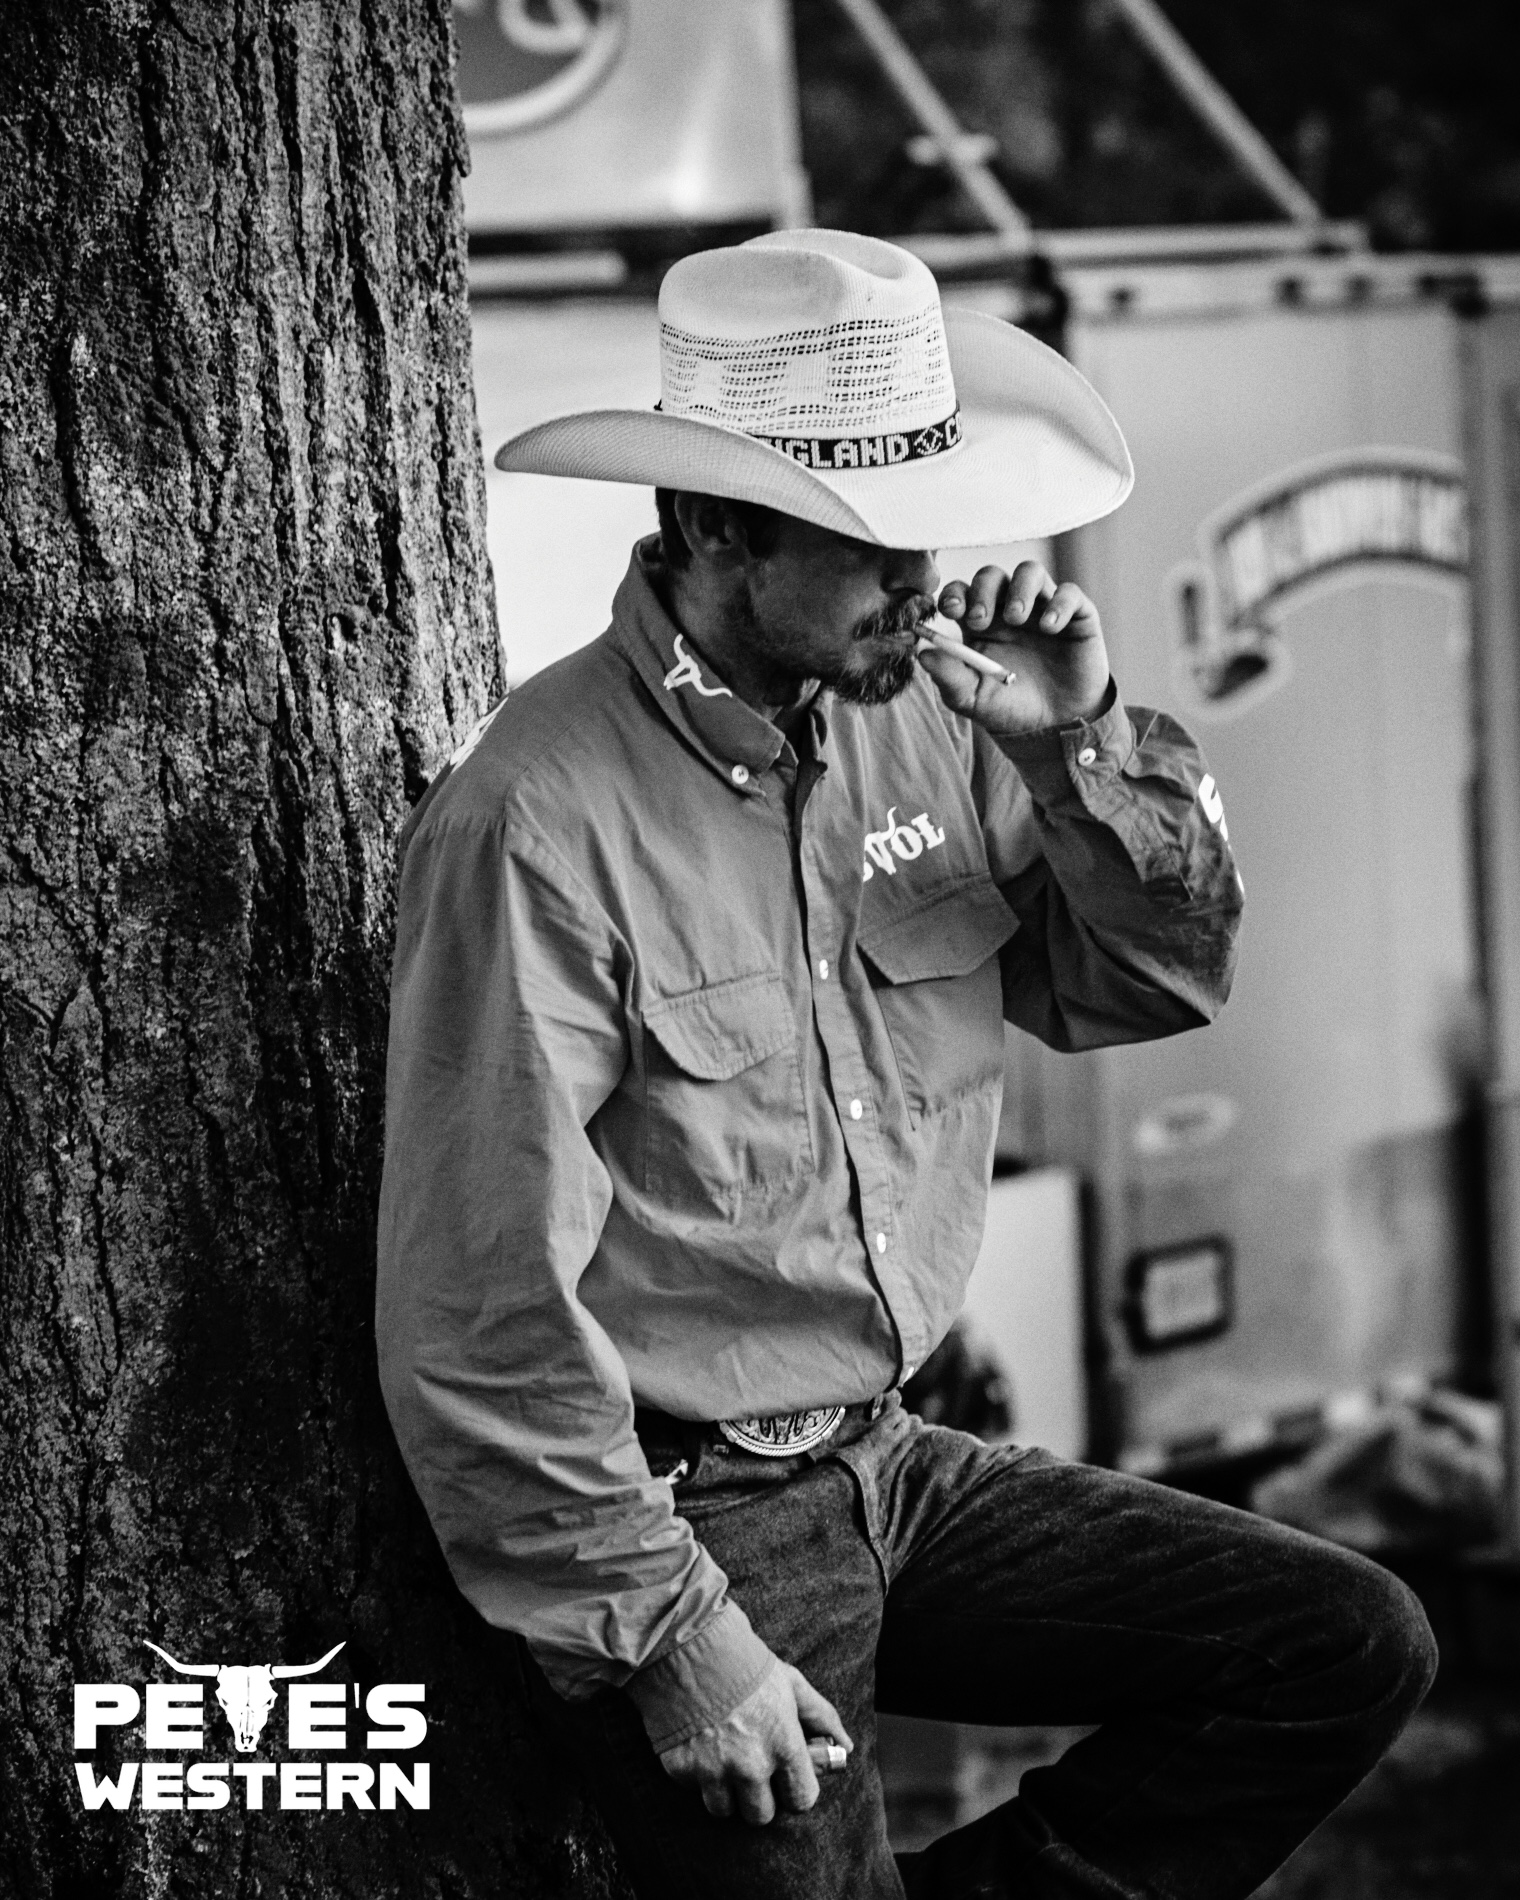 Curtis Crowley having a moment after a tough bull ride at the Norfolk Rodeo.